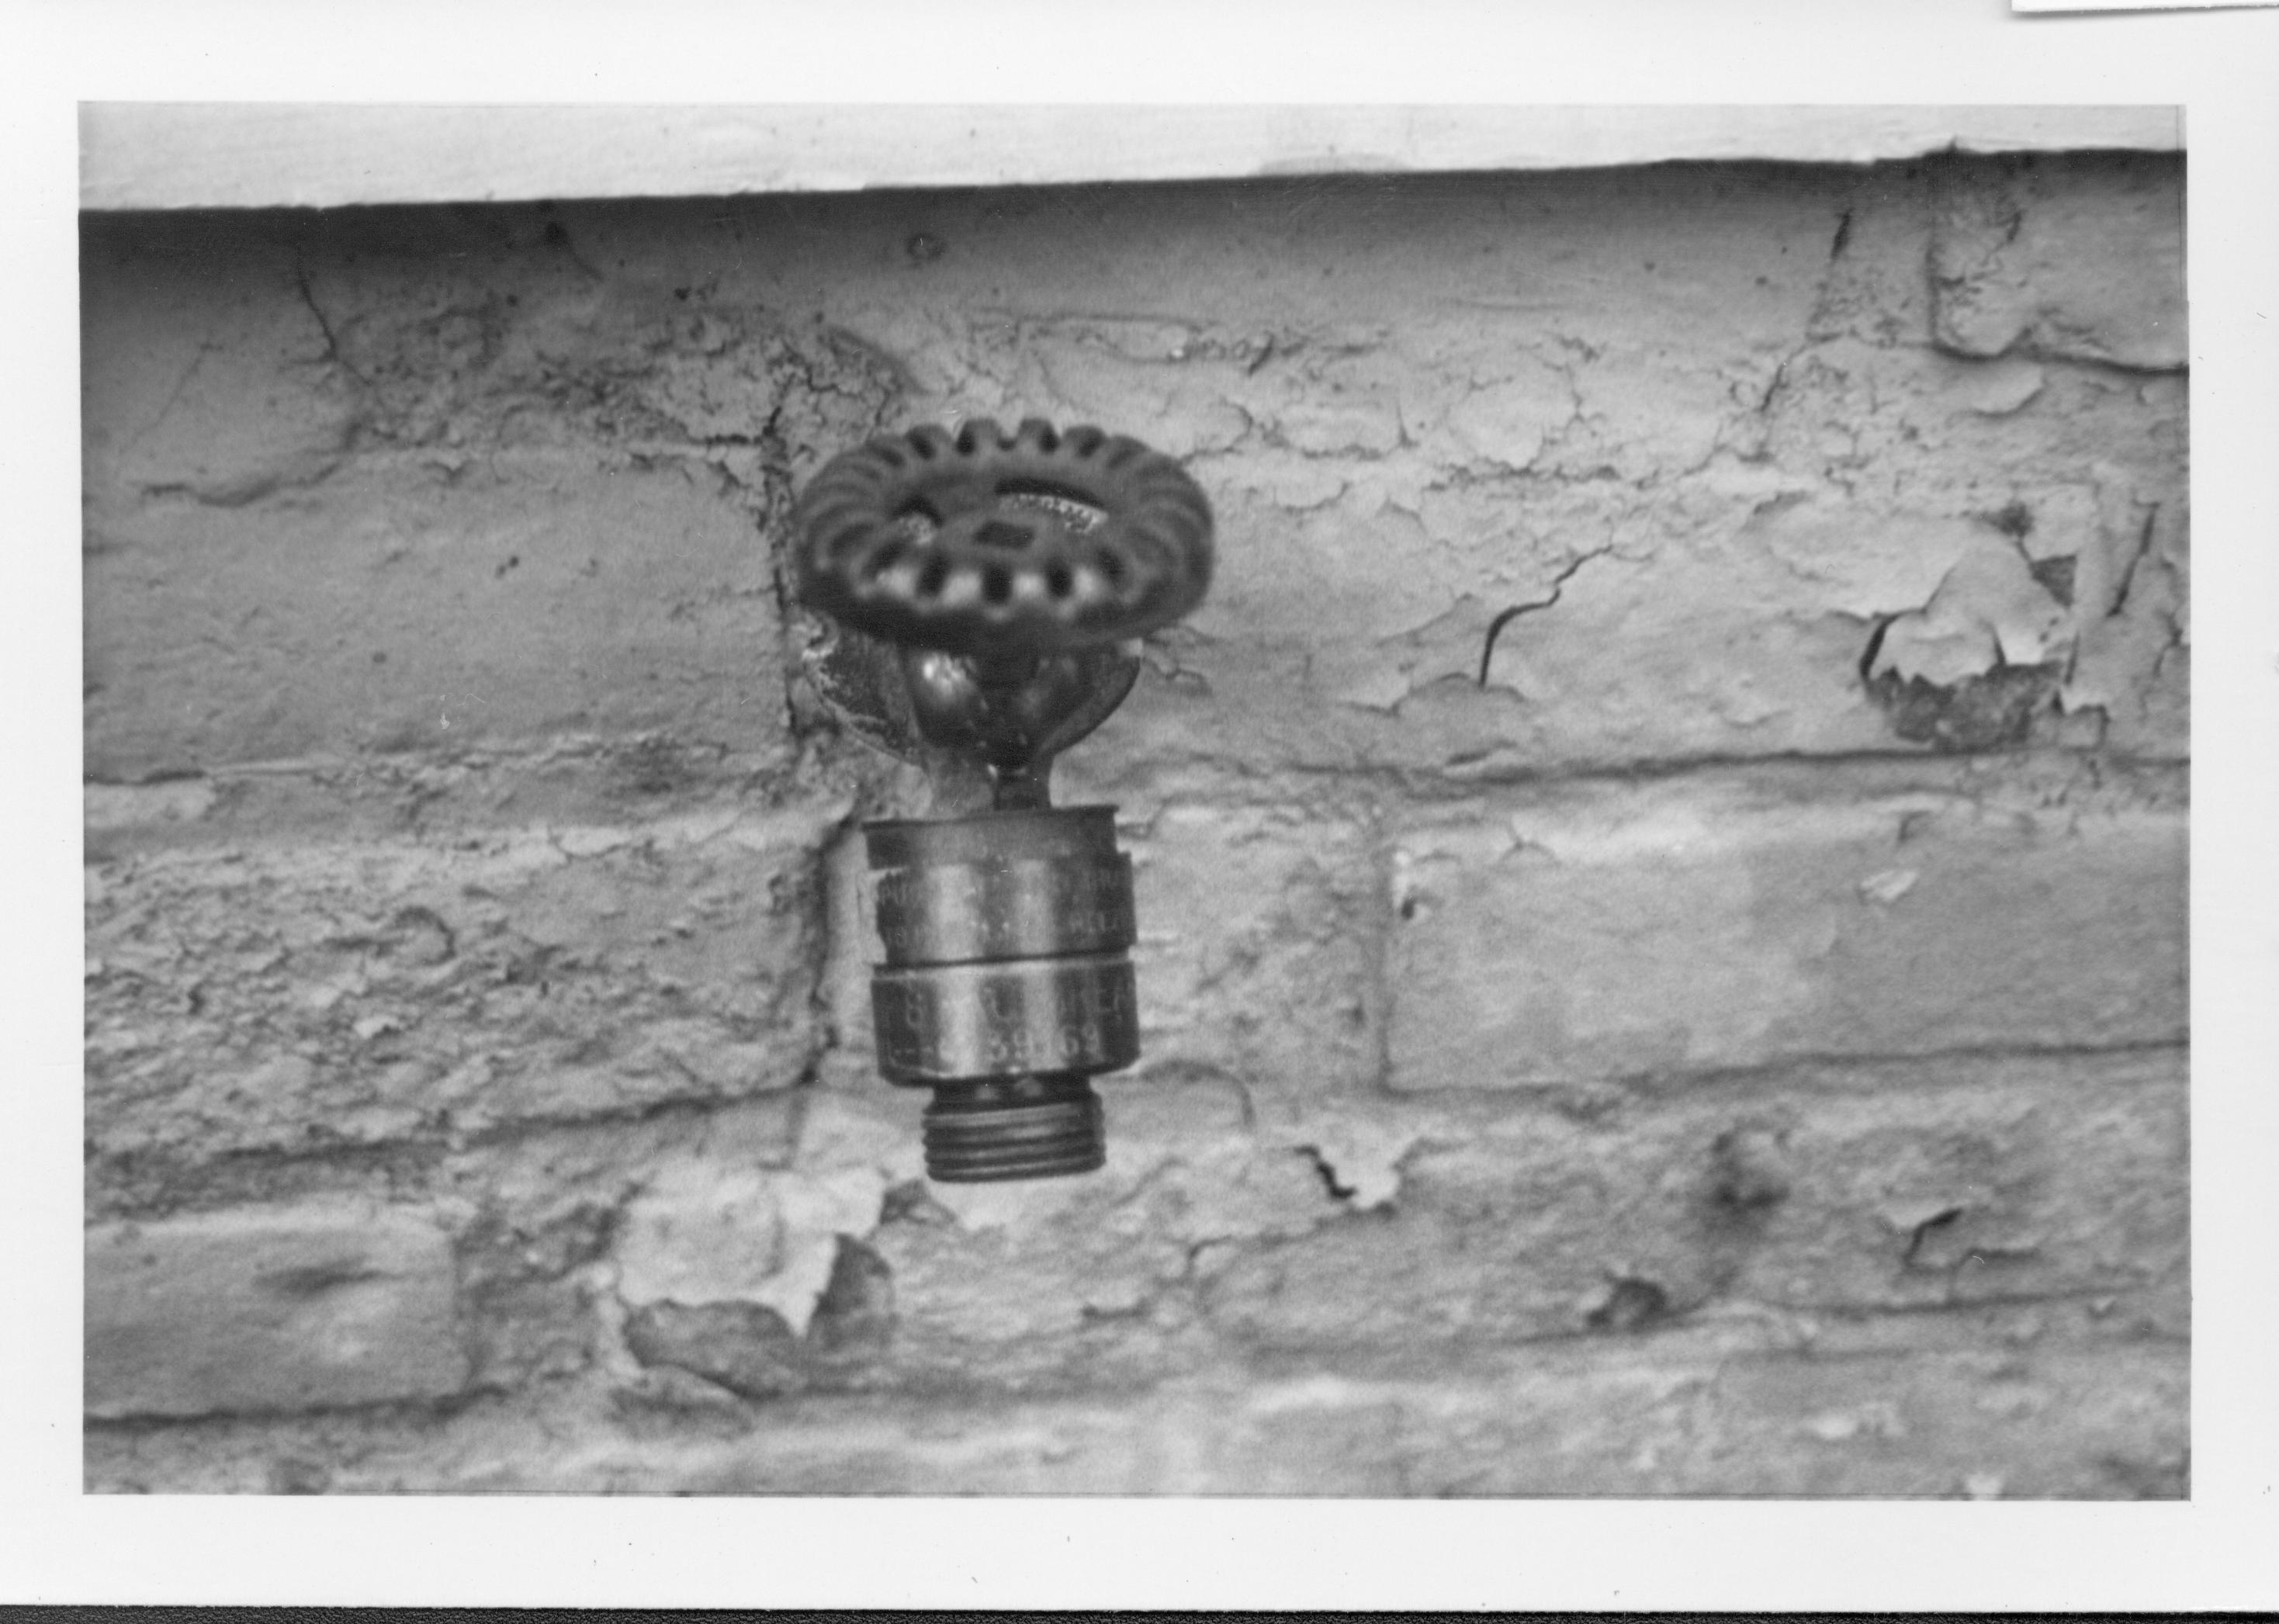 One of the water spigots for the Lincoln Home, probably along the north side of the home. All exterior spigots around the Lincoln Home were eliminated around 2012.